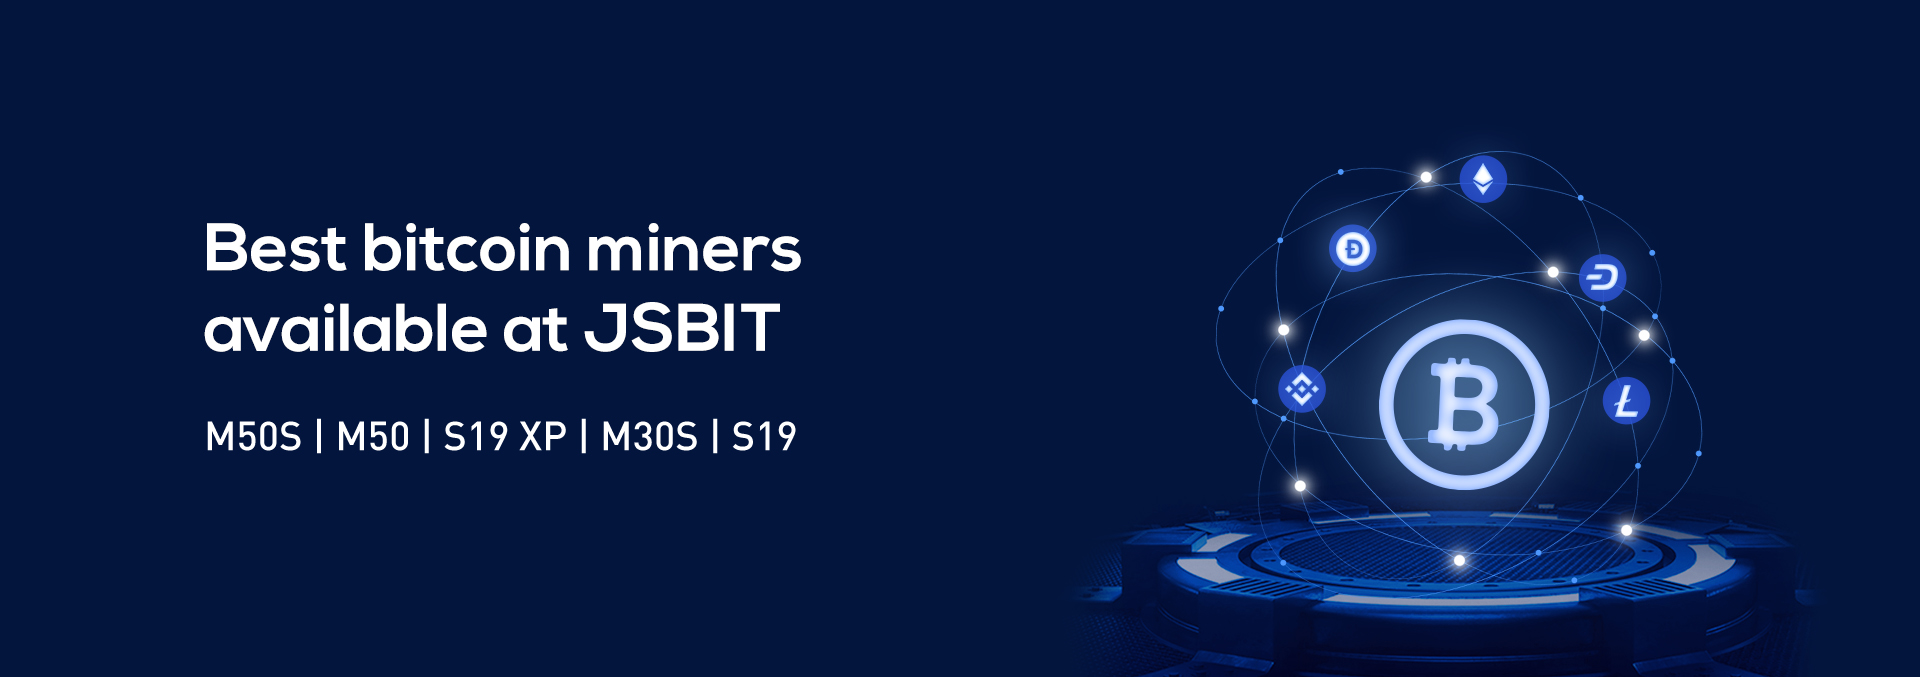 Best bitcoin miners available at JSBIT-banner-02